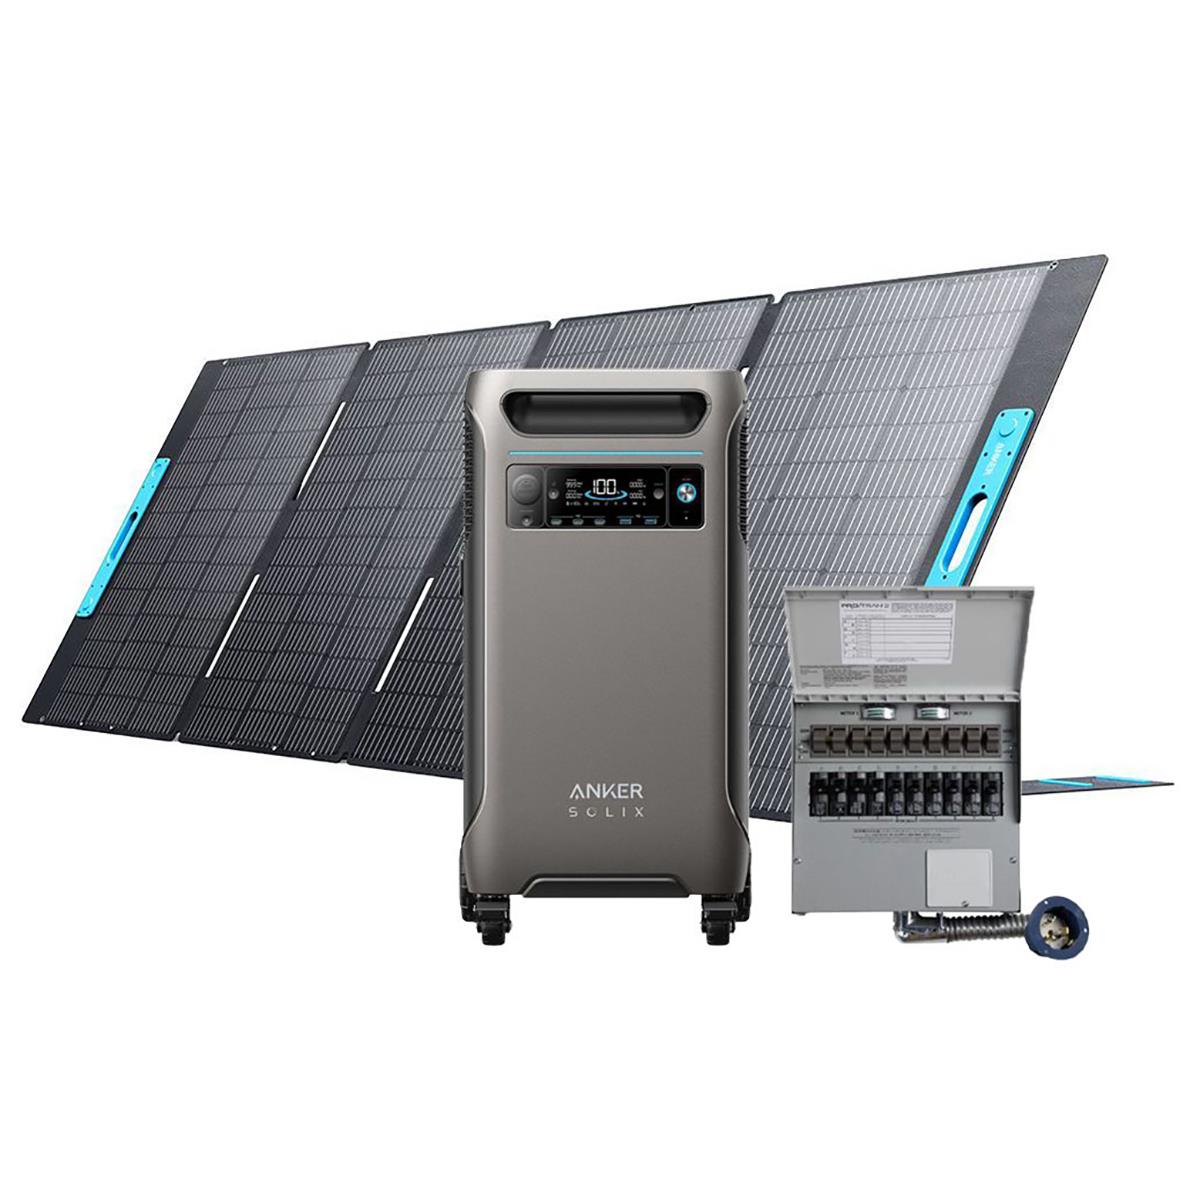 Image of Anker SOLIX F3800 6000W Power Station with Transfer Switch and 400W Solar Panel